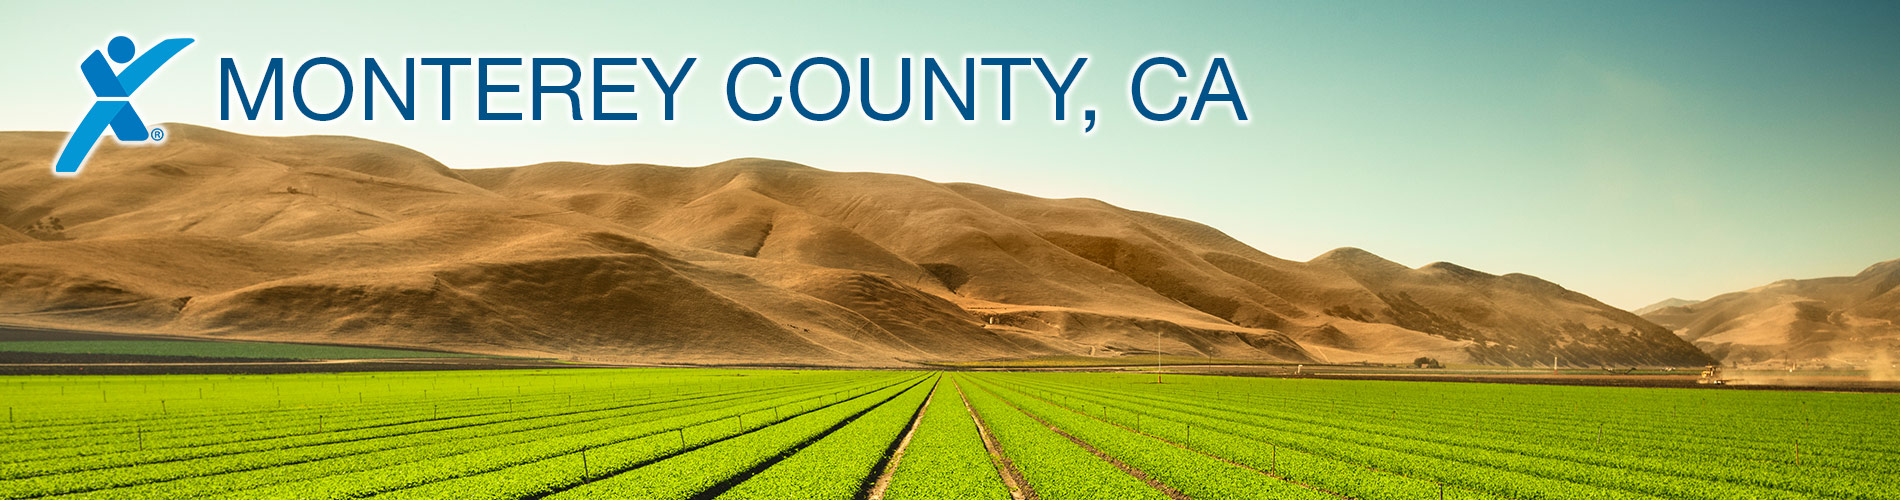 Monterey County, CA Express Jobs Front Page Banner